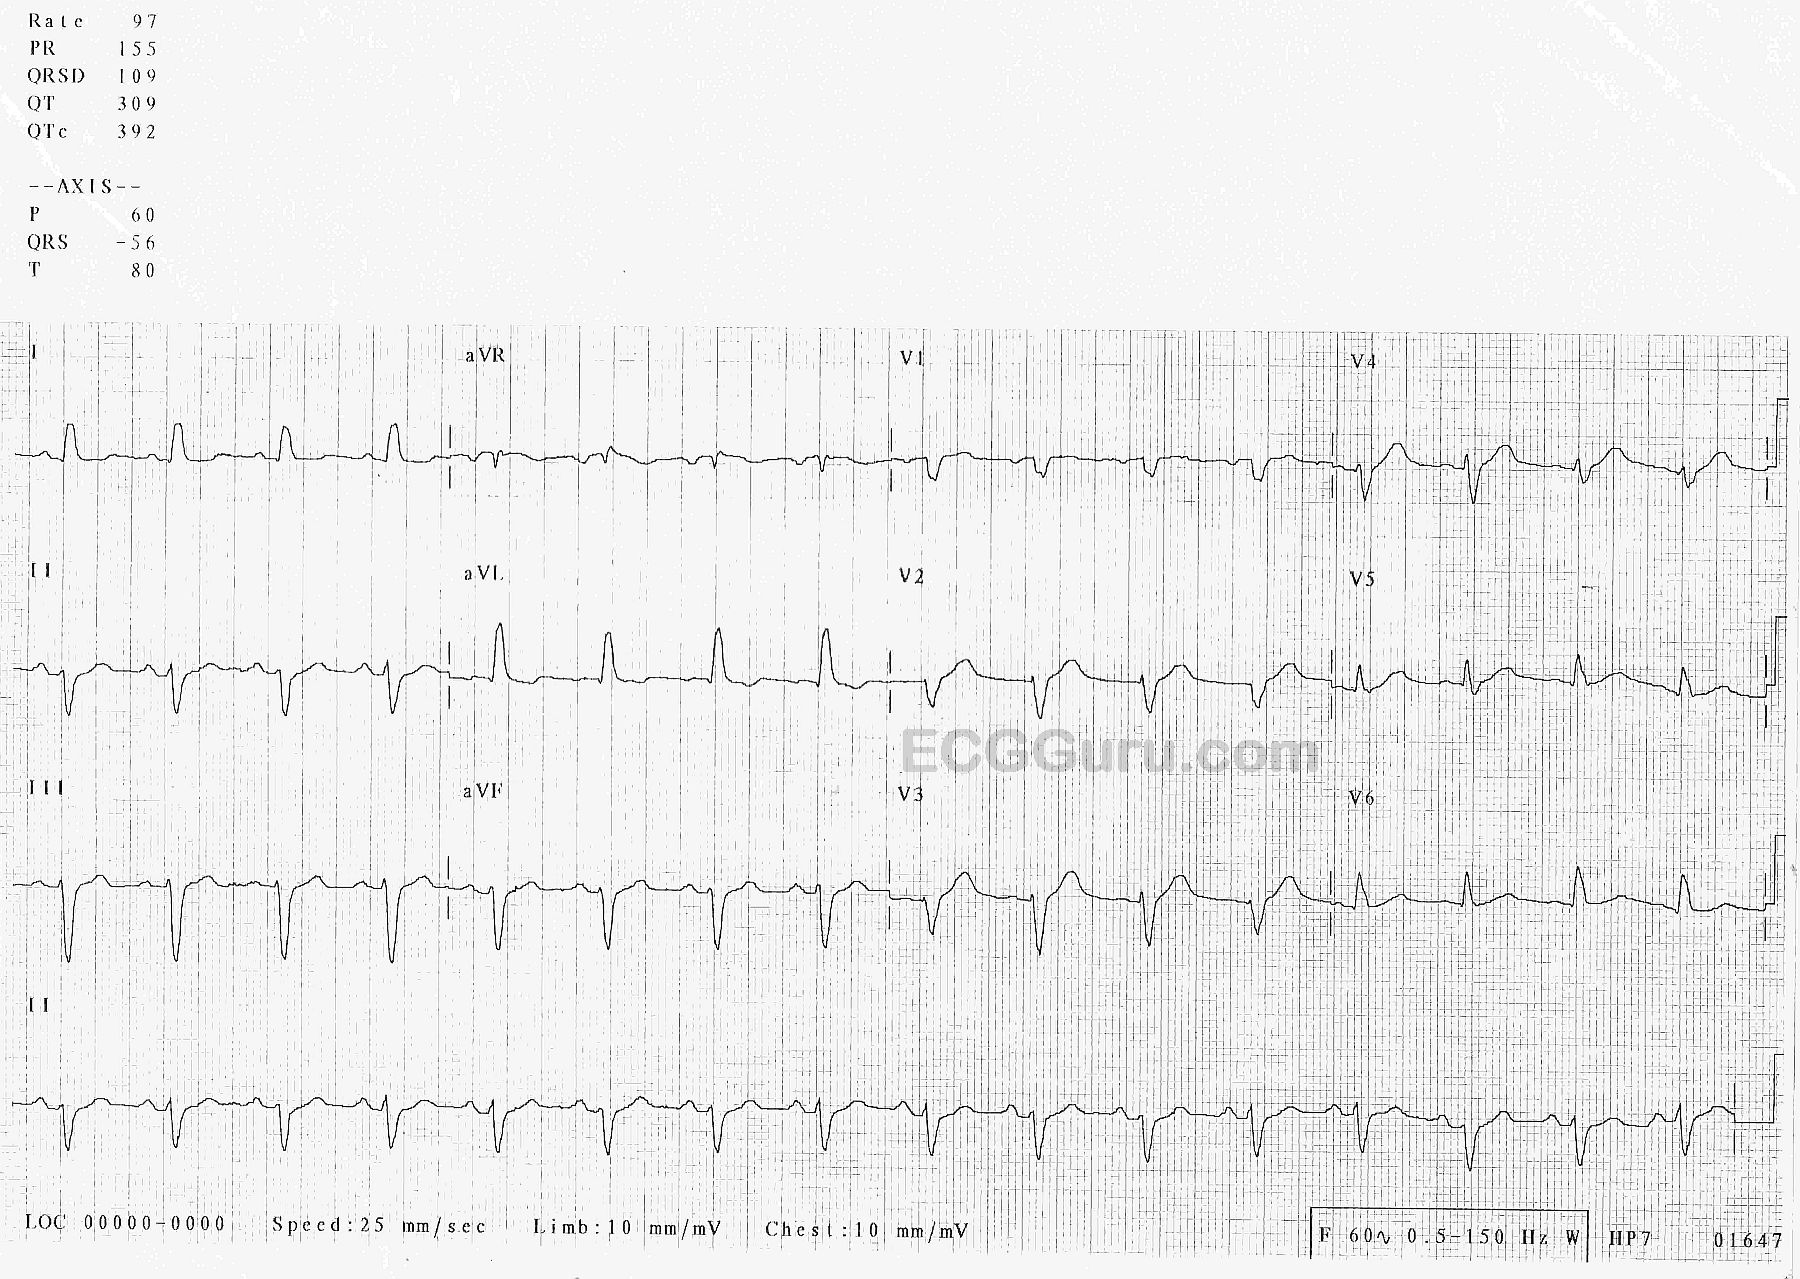 afib with ivcd